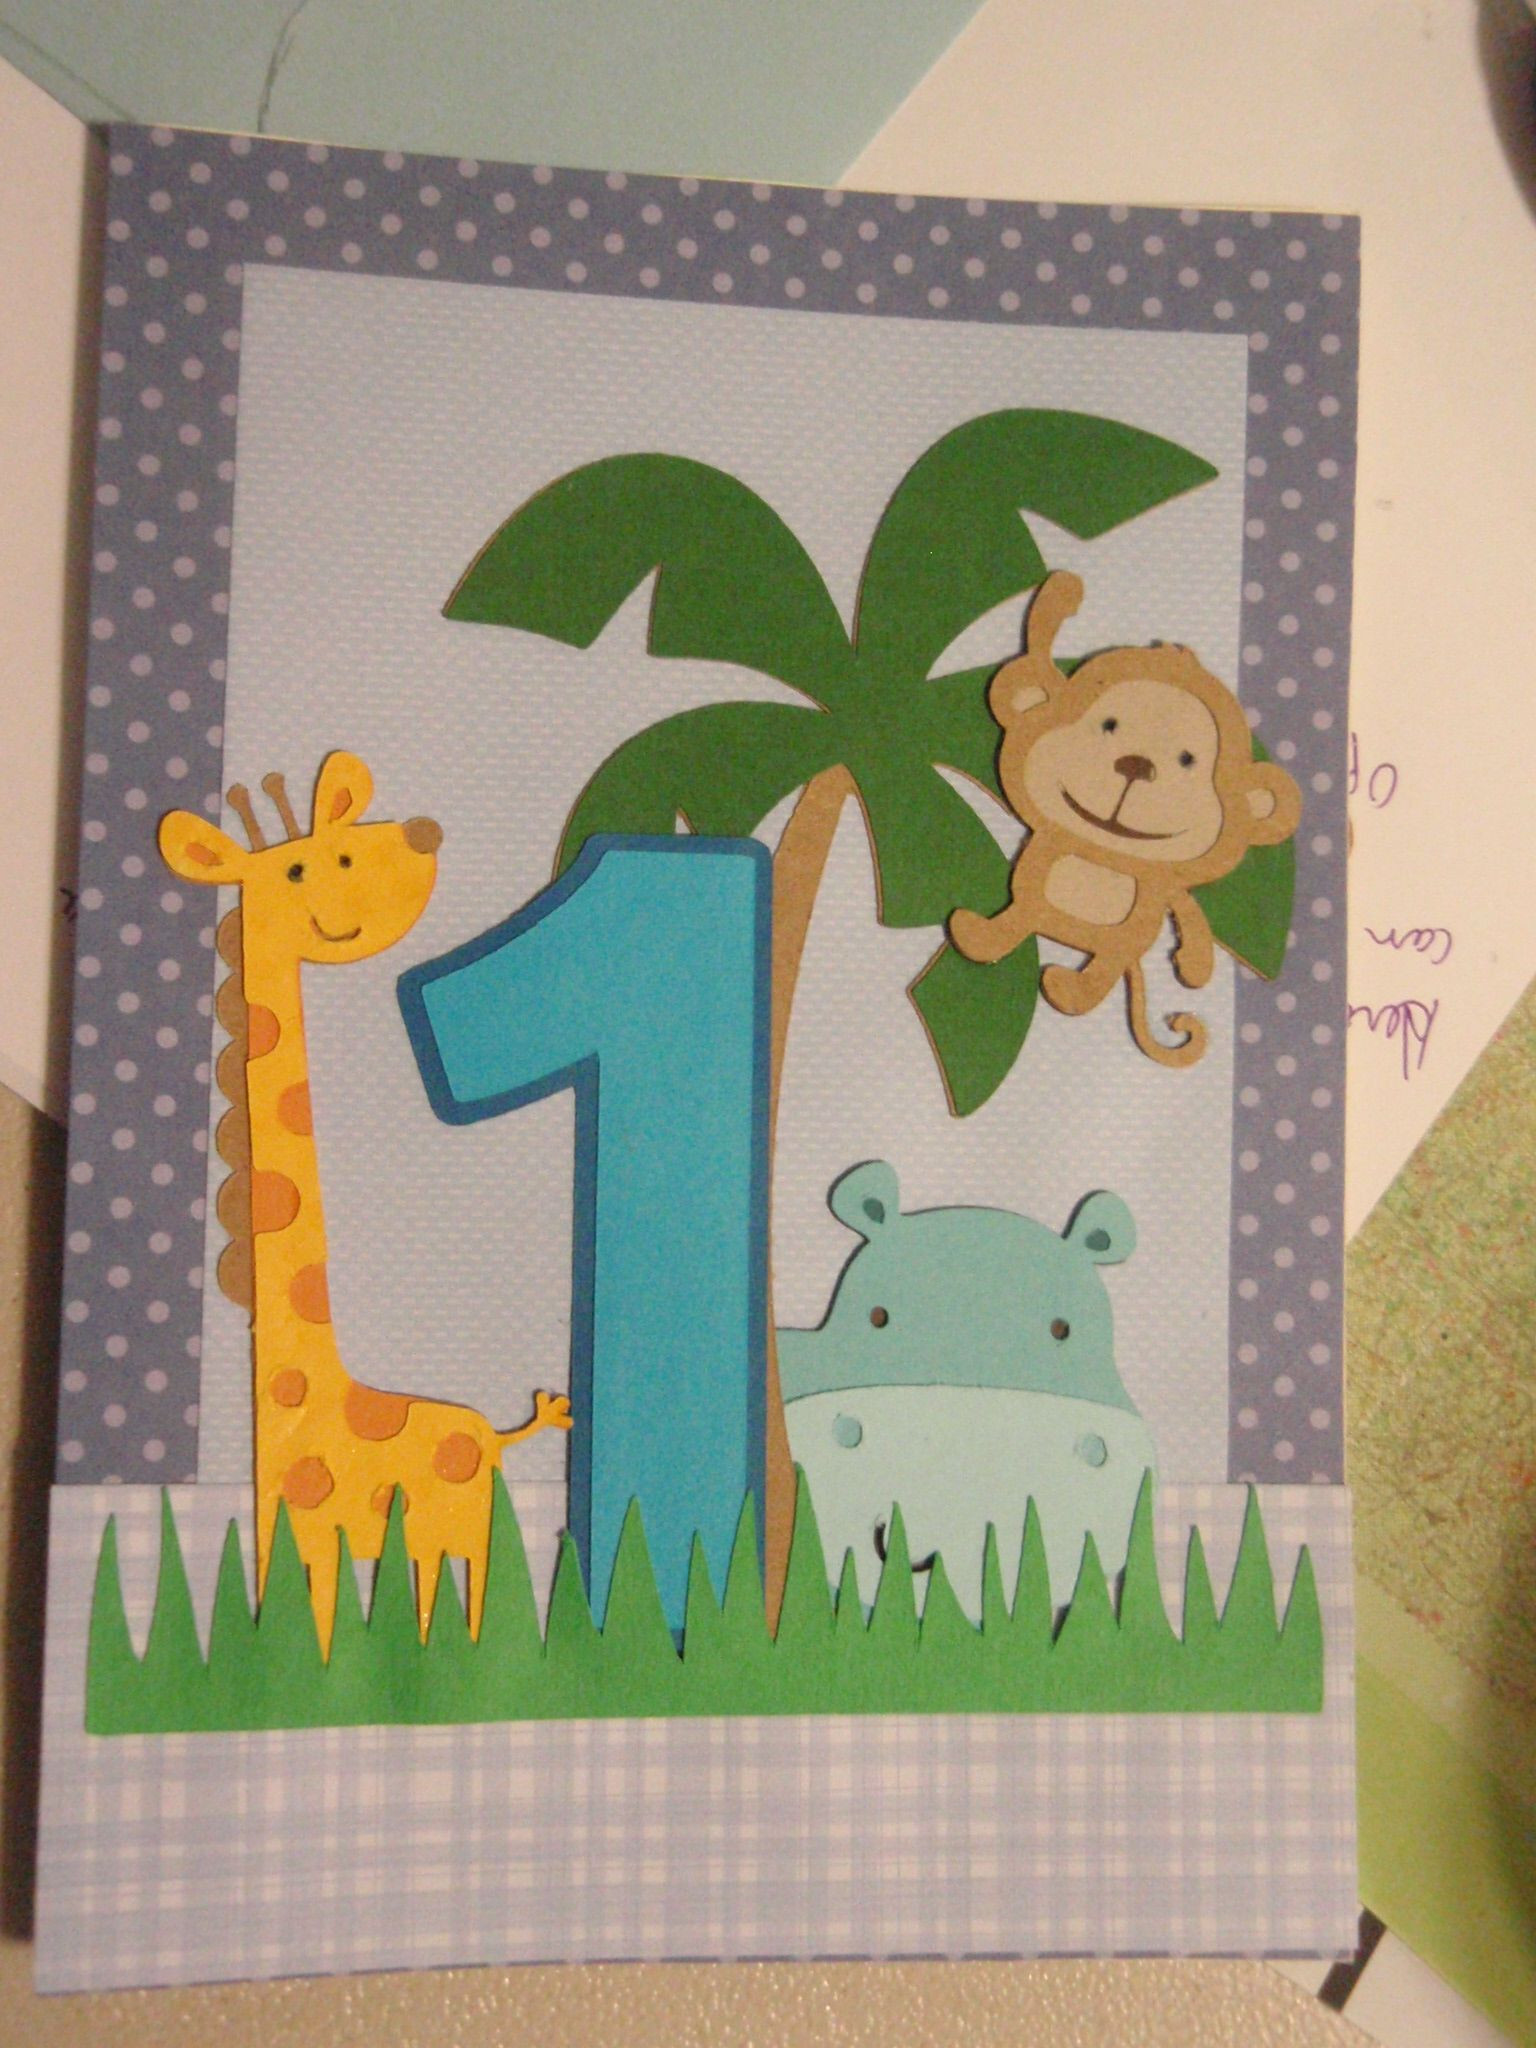 1 Year Old Baby Boy Birthday Gift Ideas
 Bday card for 1 year old